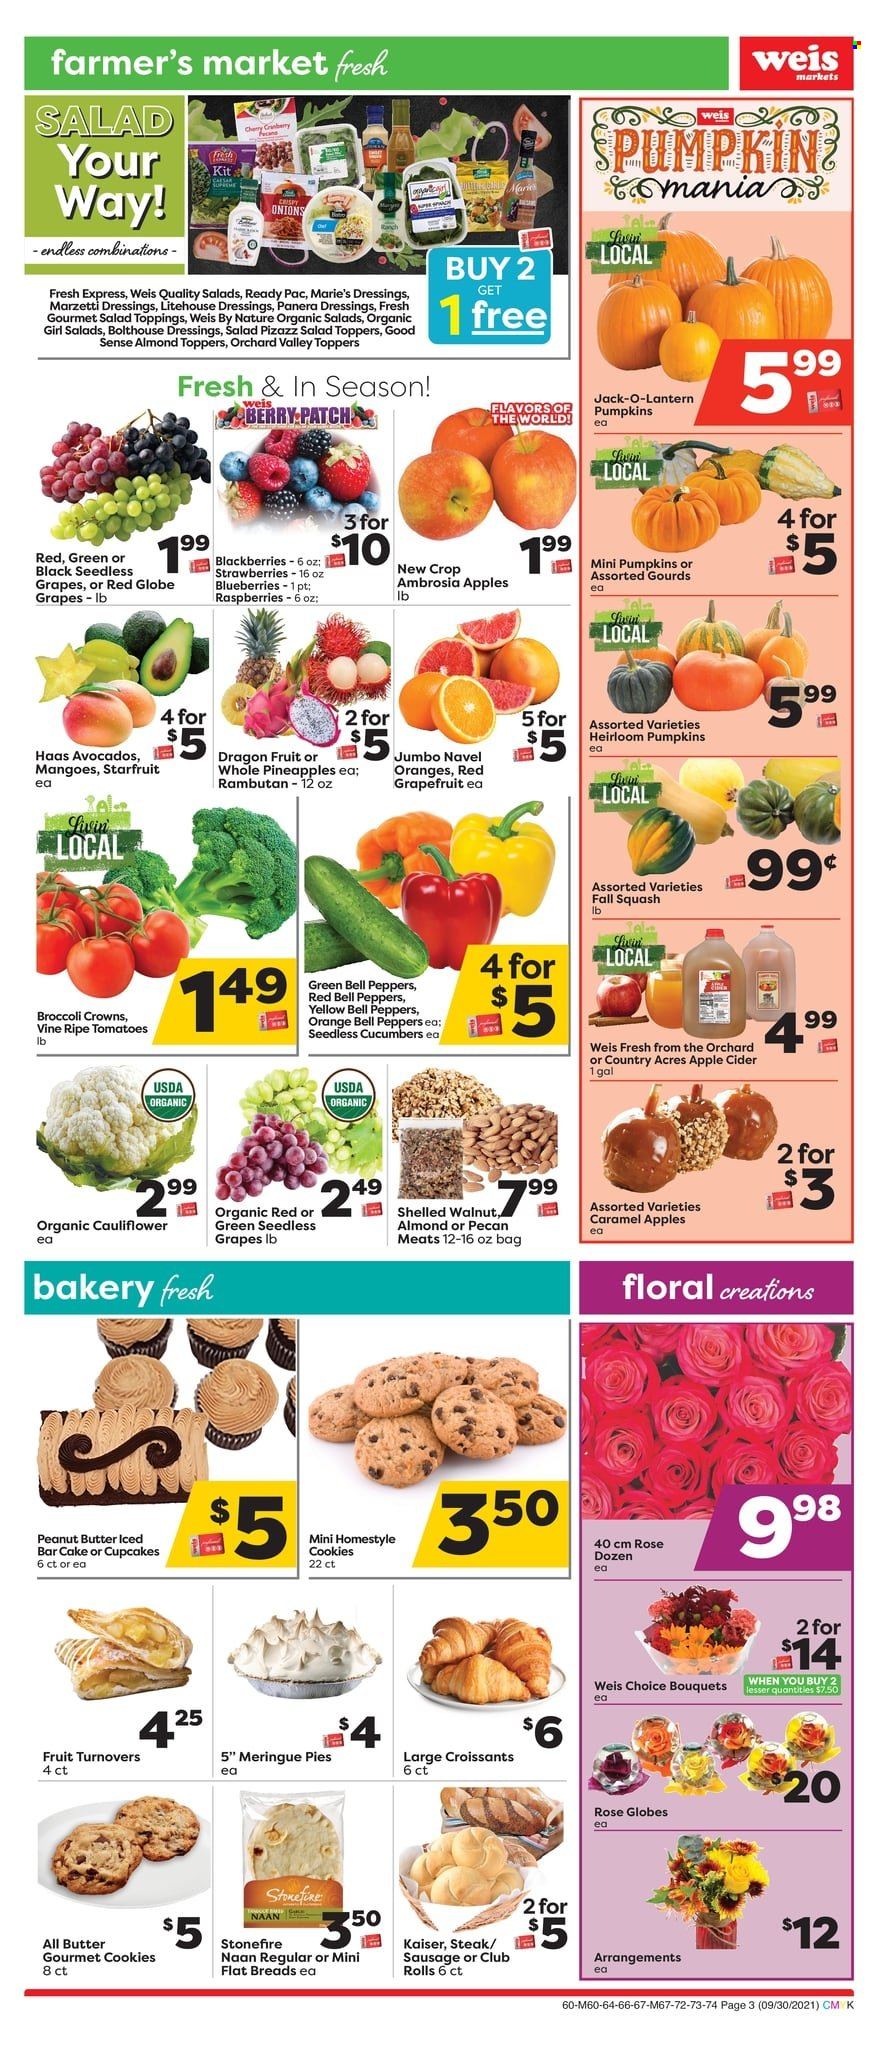 thumbnail - Weis Flyer - 09/30/2021 - 11/04/2021 - Sales products - seedless grapes, cake, croissant, turnovers, cupcake, cauliflower, cucumber, tomatoes, pumpkin, avocado, blackberries, blueberries, grapefruits, grapes, Red Globe, strawberries, pineapple, oranges, dragon fruit, steak, Ready Pac, sausage, cookies, caramel, peanut butter, wine, rosé wine, apple cider, cider, lantern, bouquet, rose, navel oranges. Page 3.